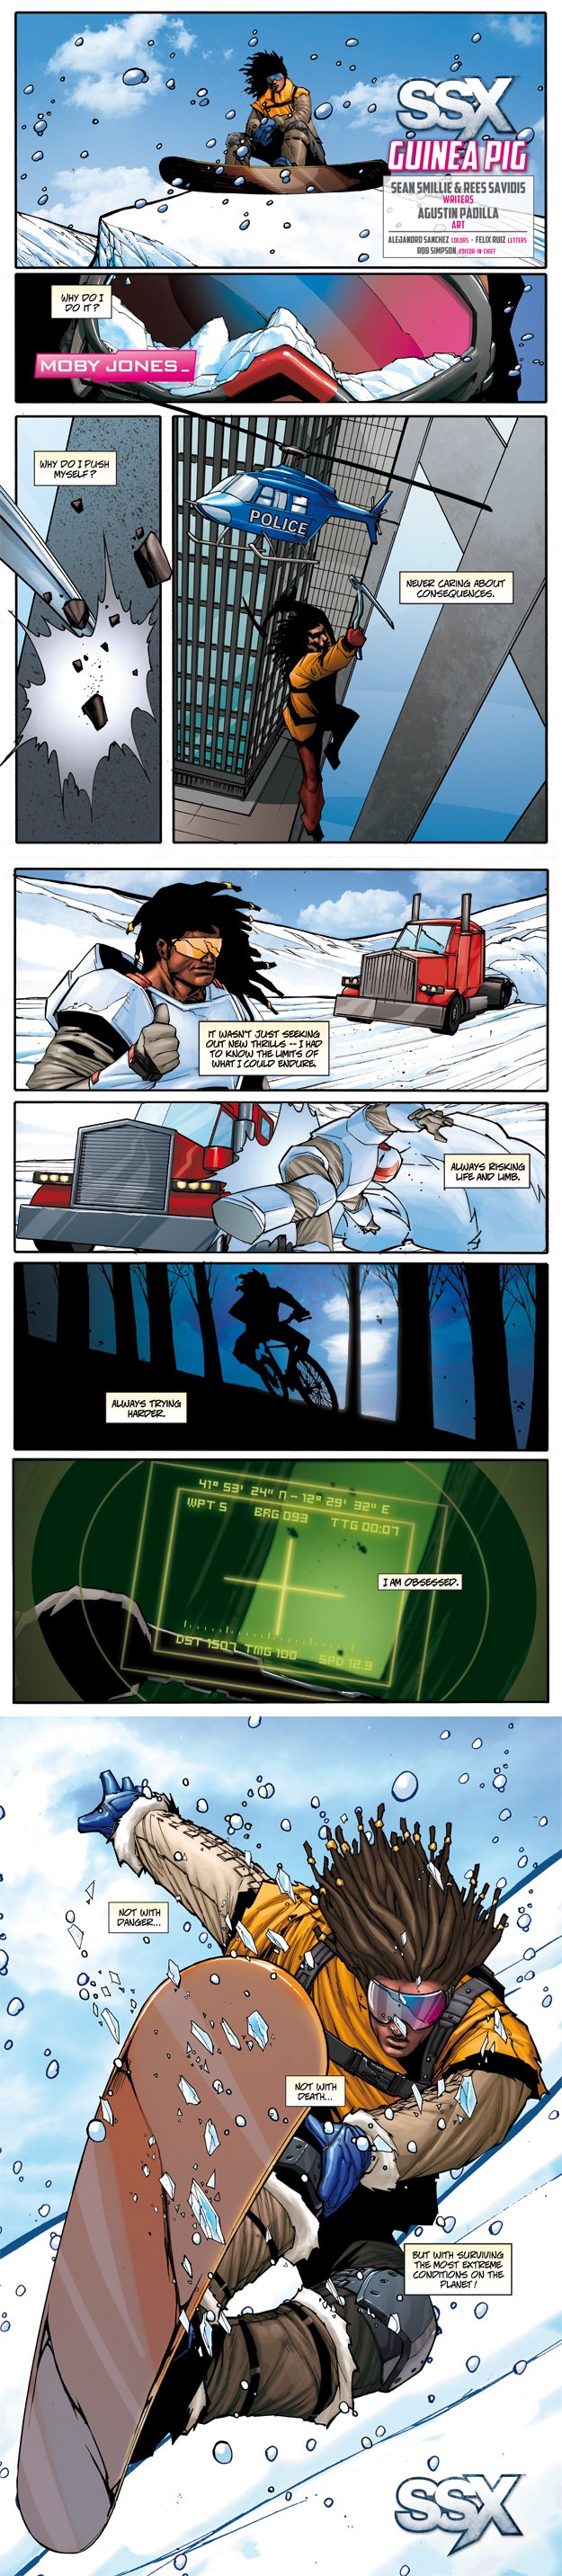 SSX-Reboot_Comic-Moby